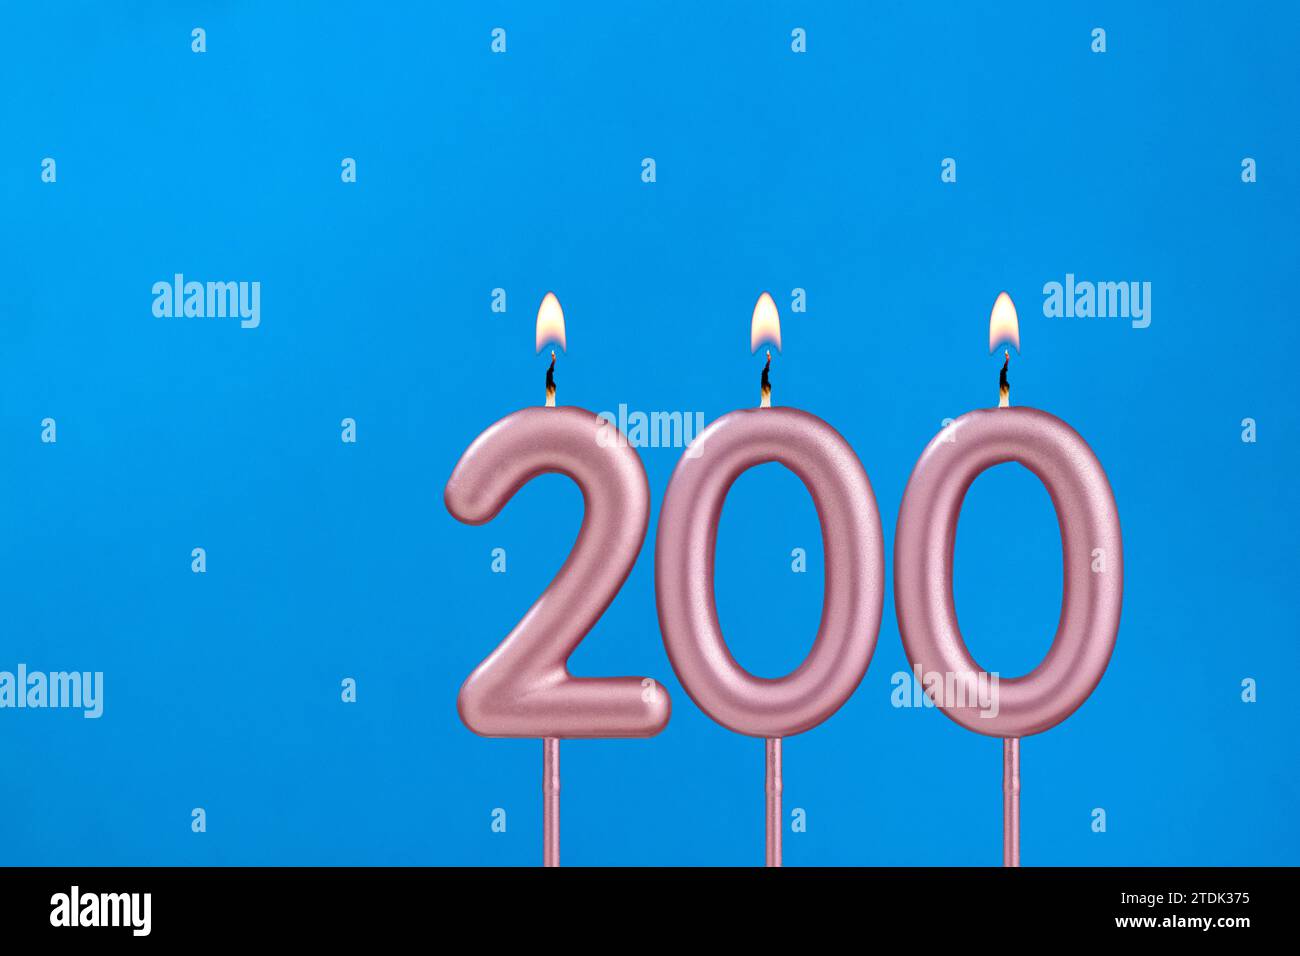 Candle number 200 - Number of followers or likes Stock Photo